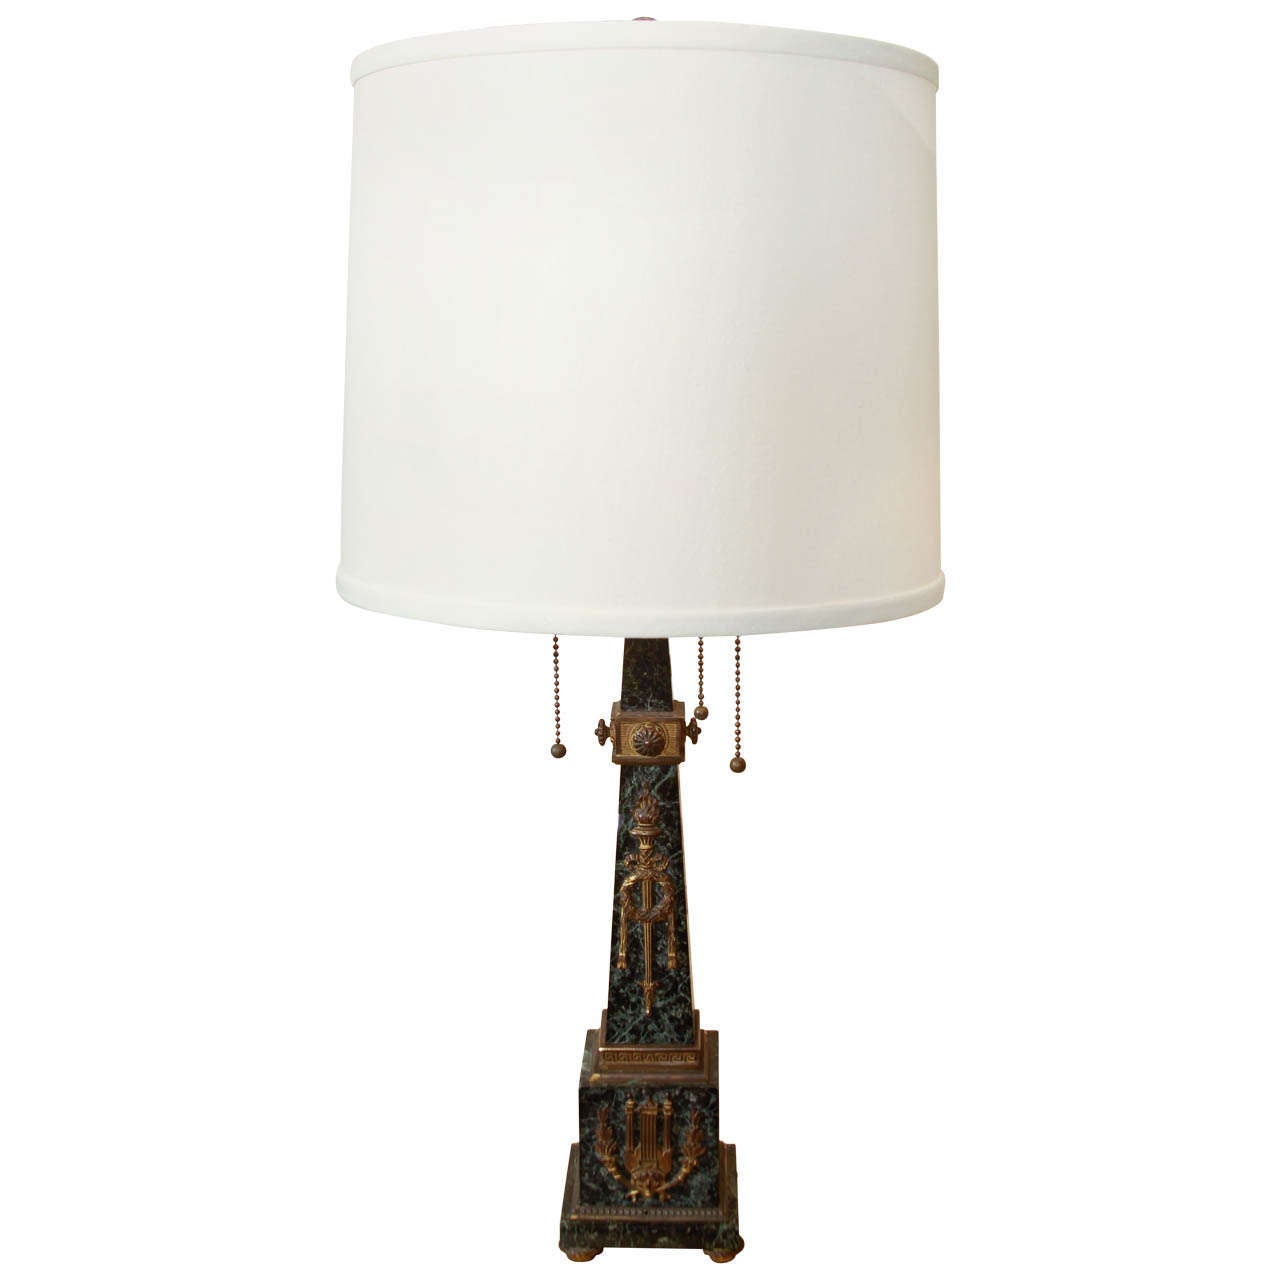 Early 20th Century Obelisk Table Lamp For Sale